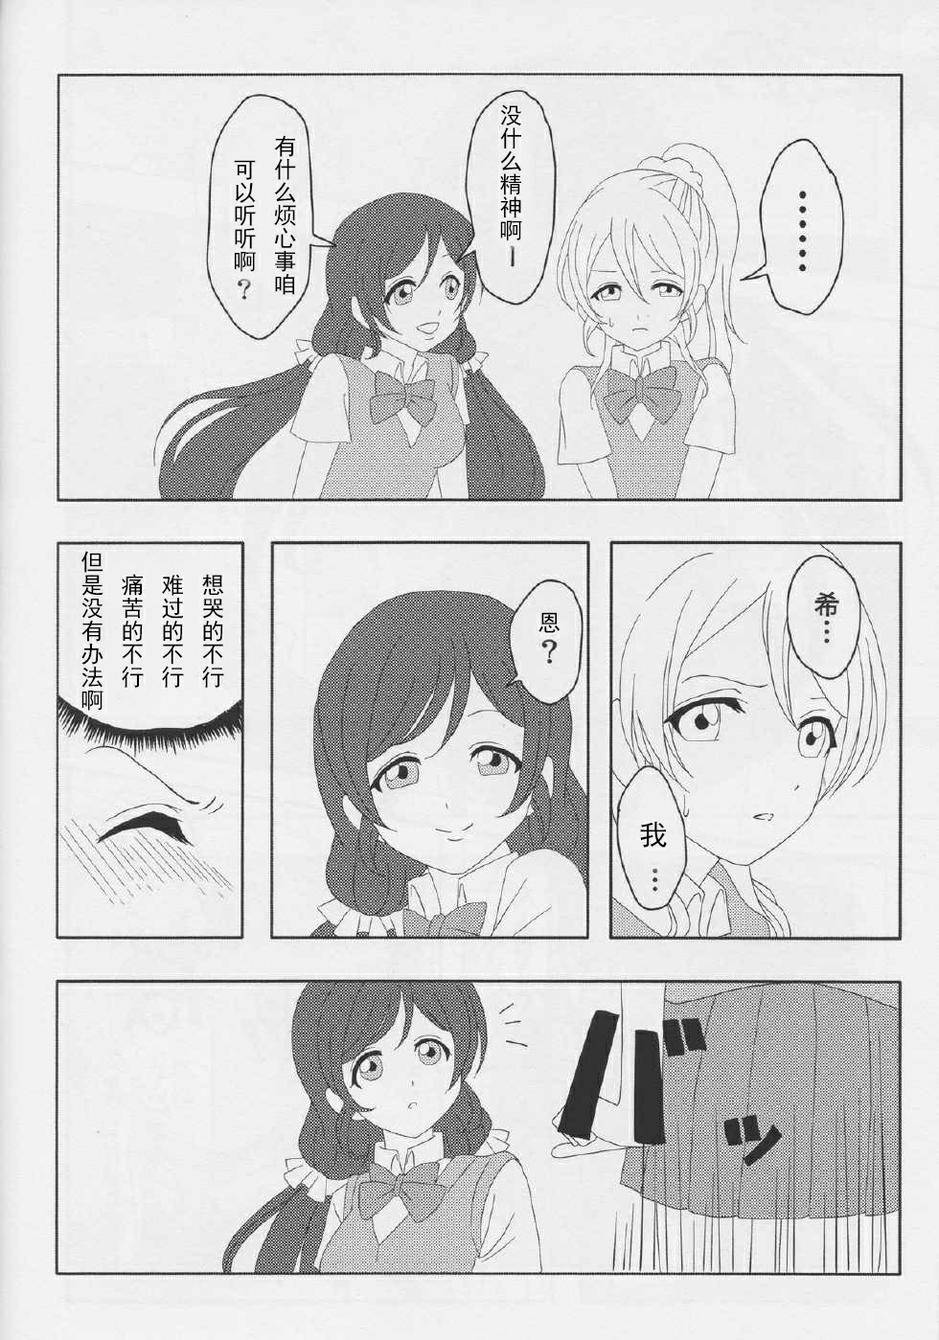 《LoveLive》漫画 笑颜的假面